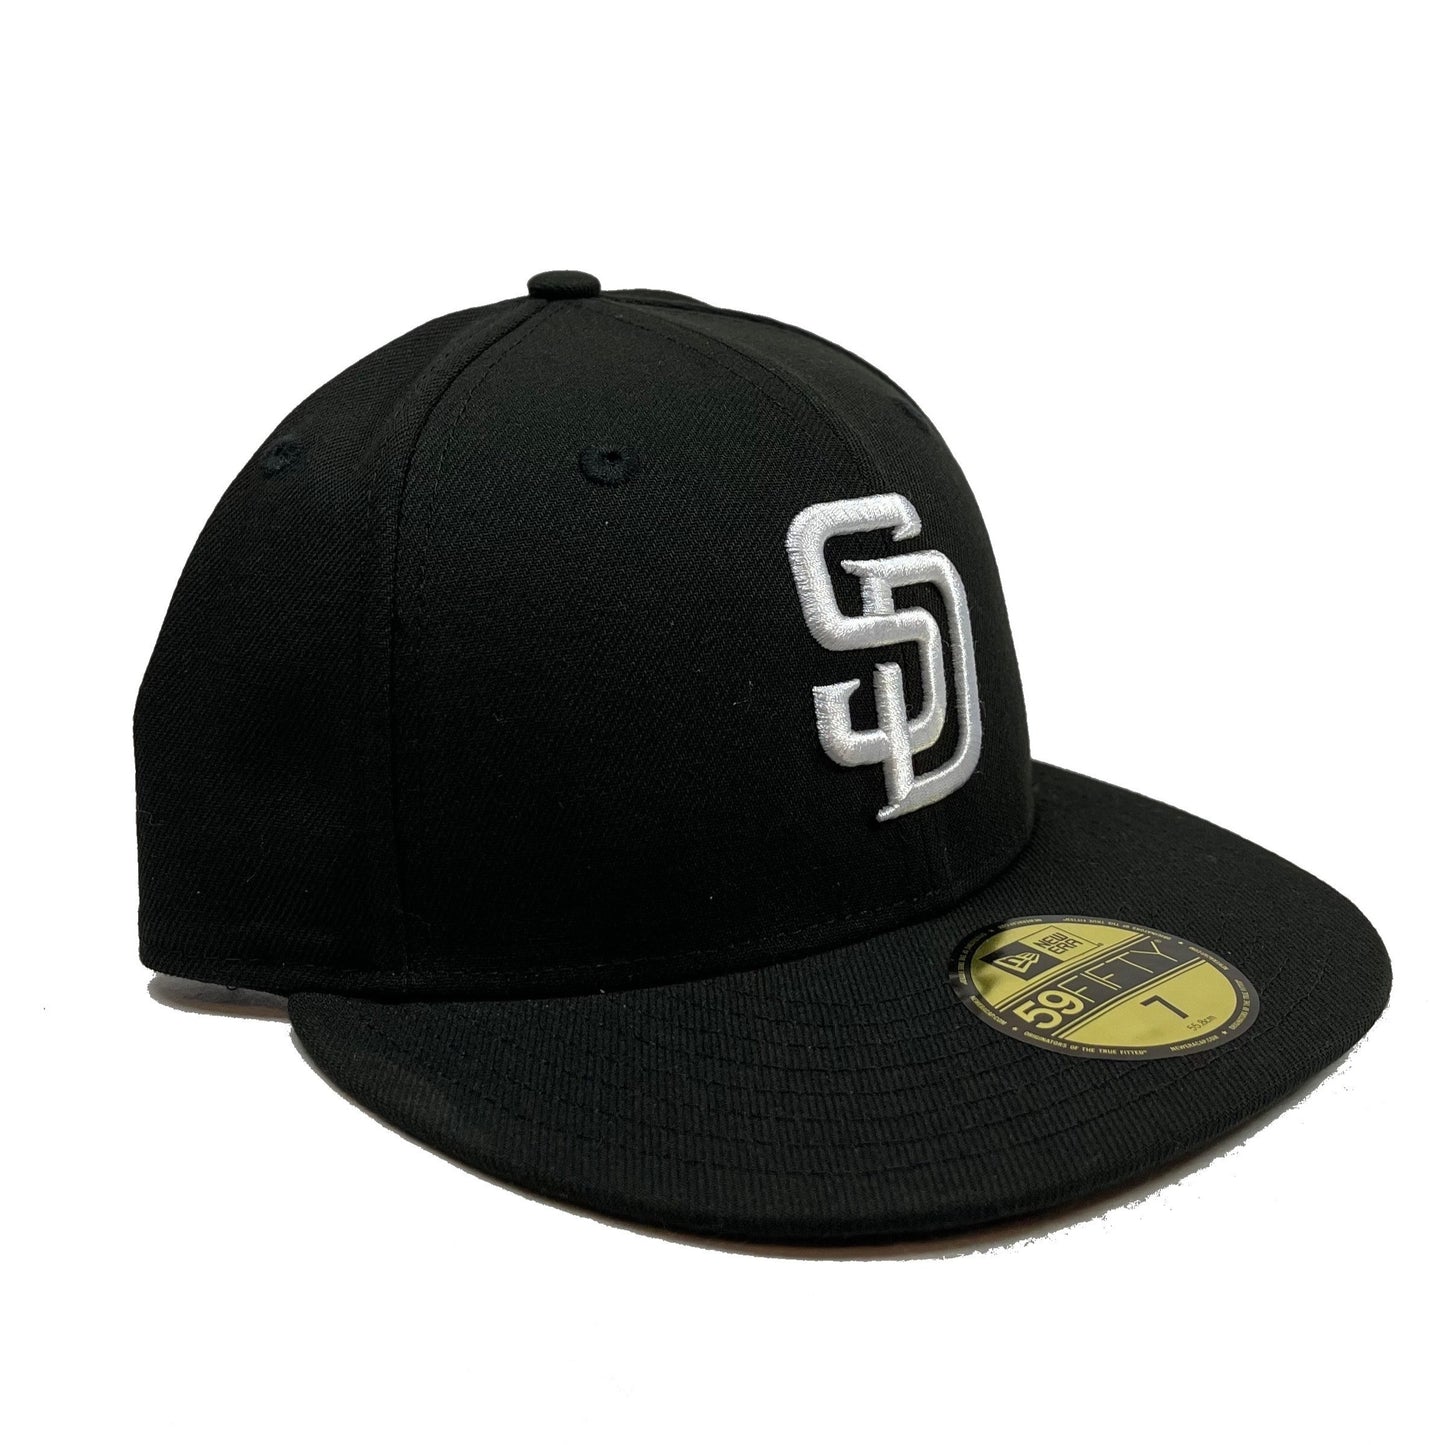 San Diego Padres (Black) Fitted